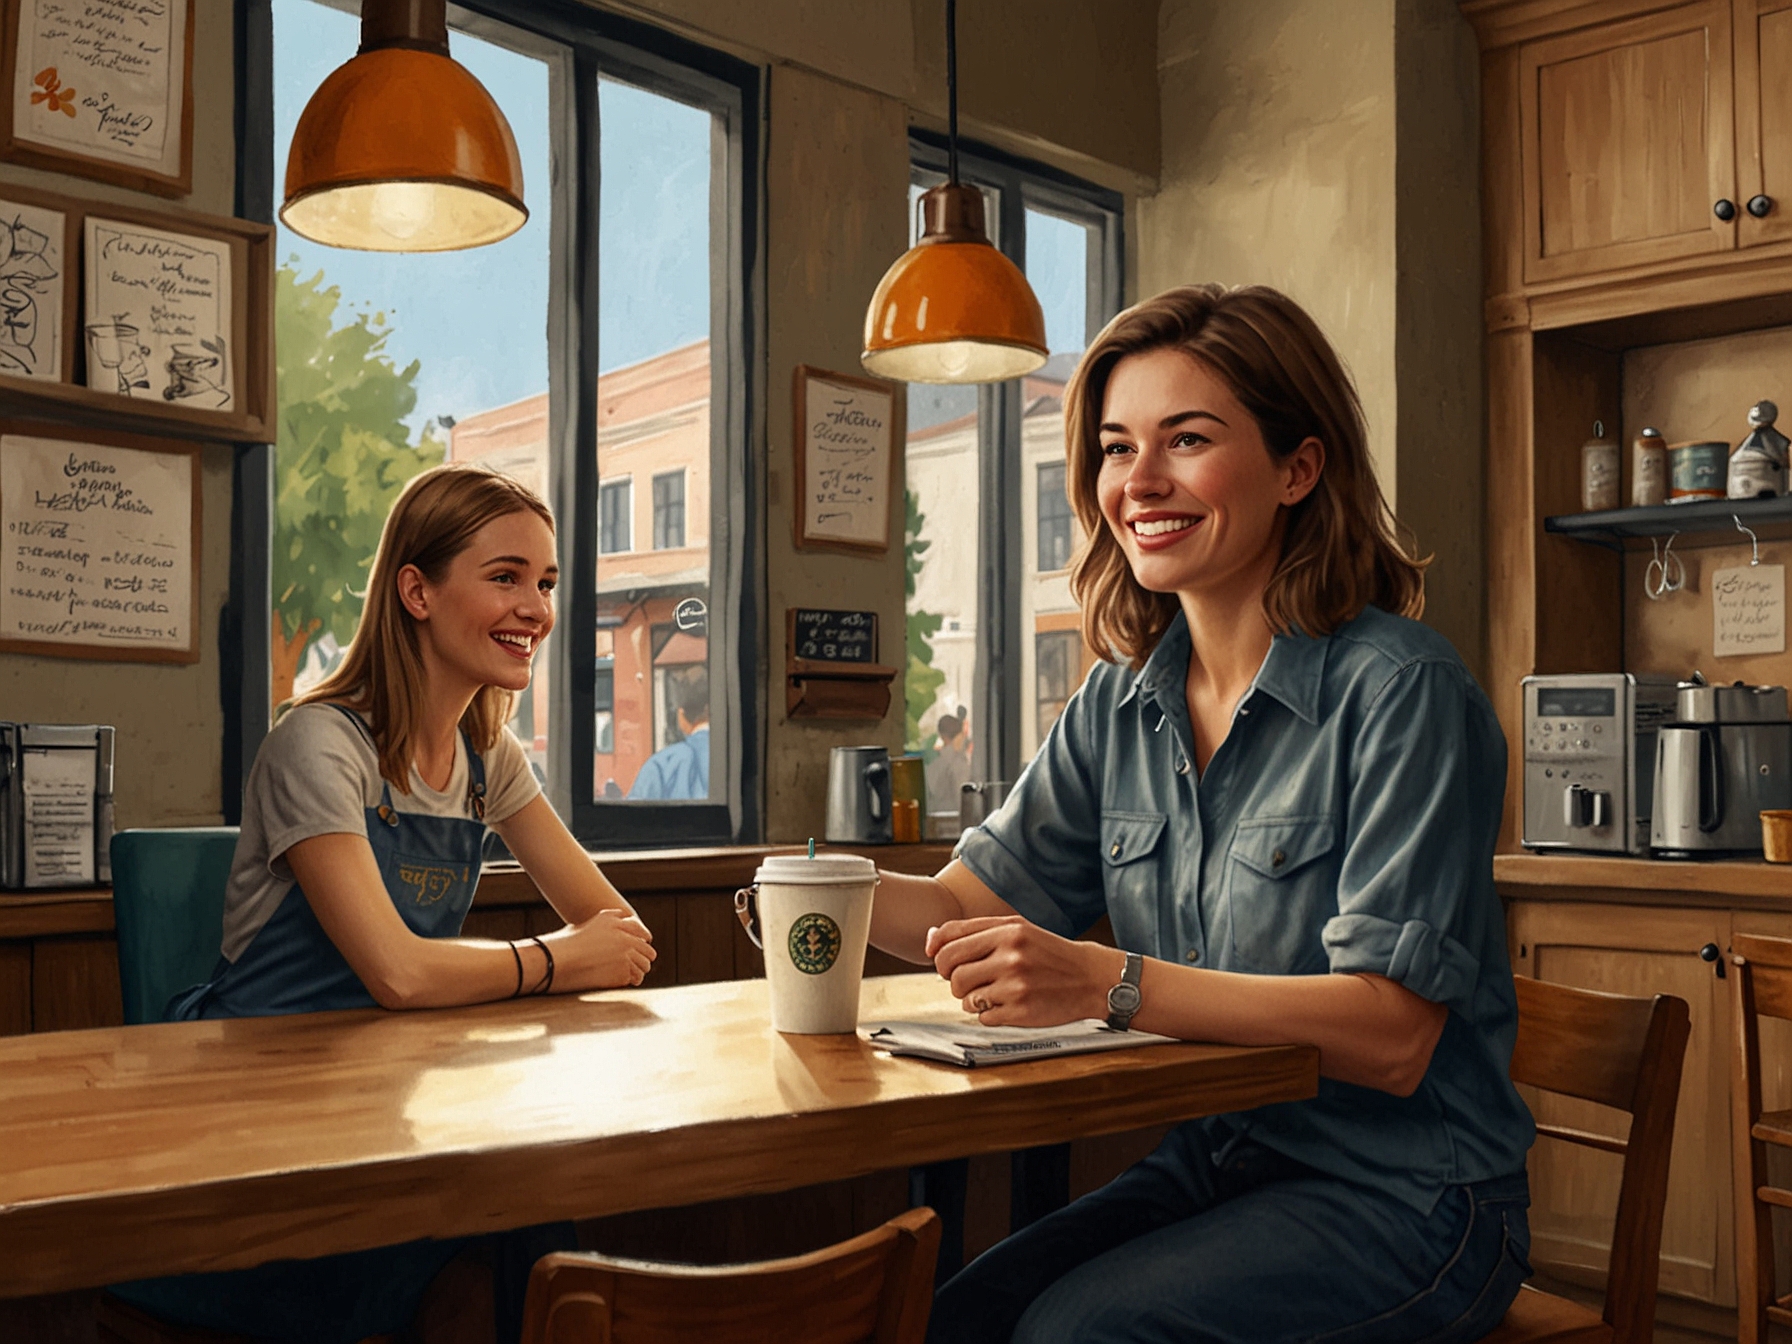 Leticia Cline, in a casual outfit, is interacting with patrons at her coffee shop. The image captures the friendly atmosphere of Main Street Coffee and Goods as she manages daily operations with enthusiasm.